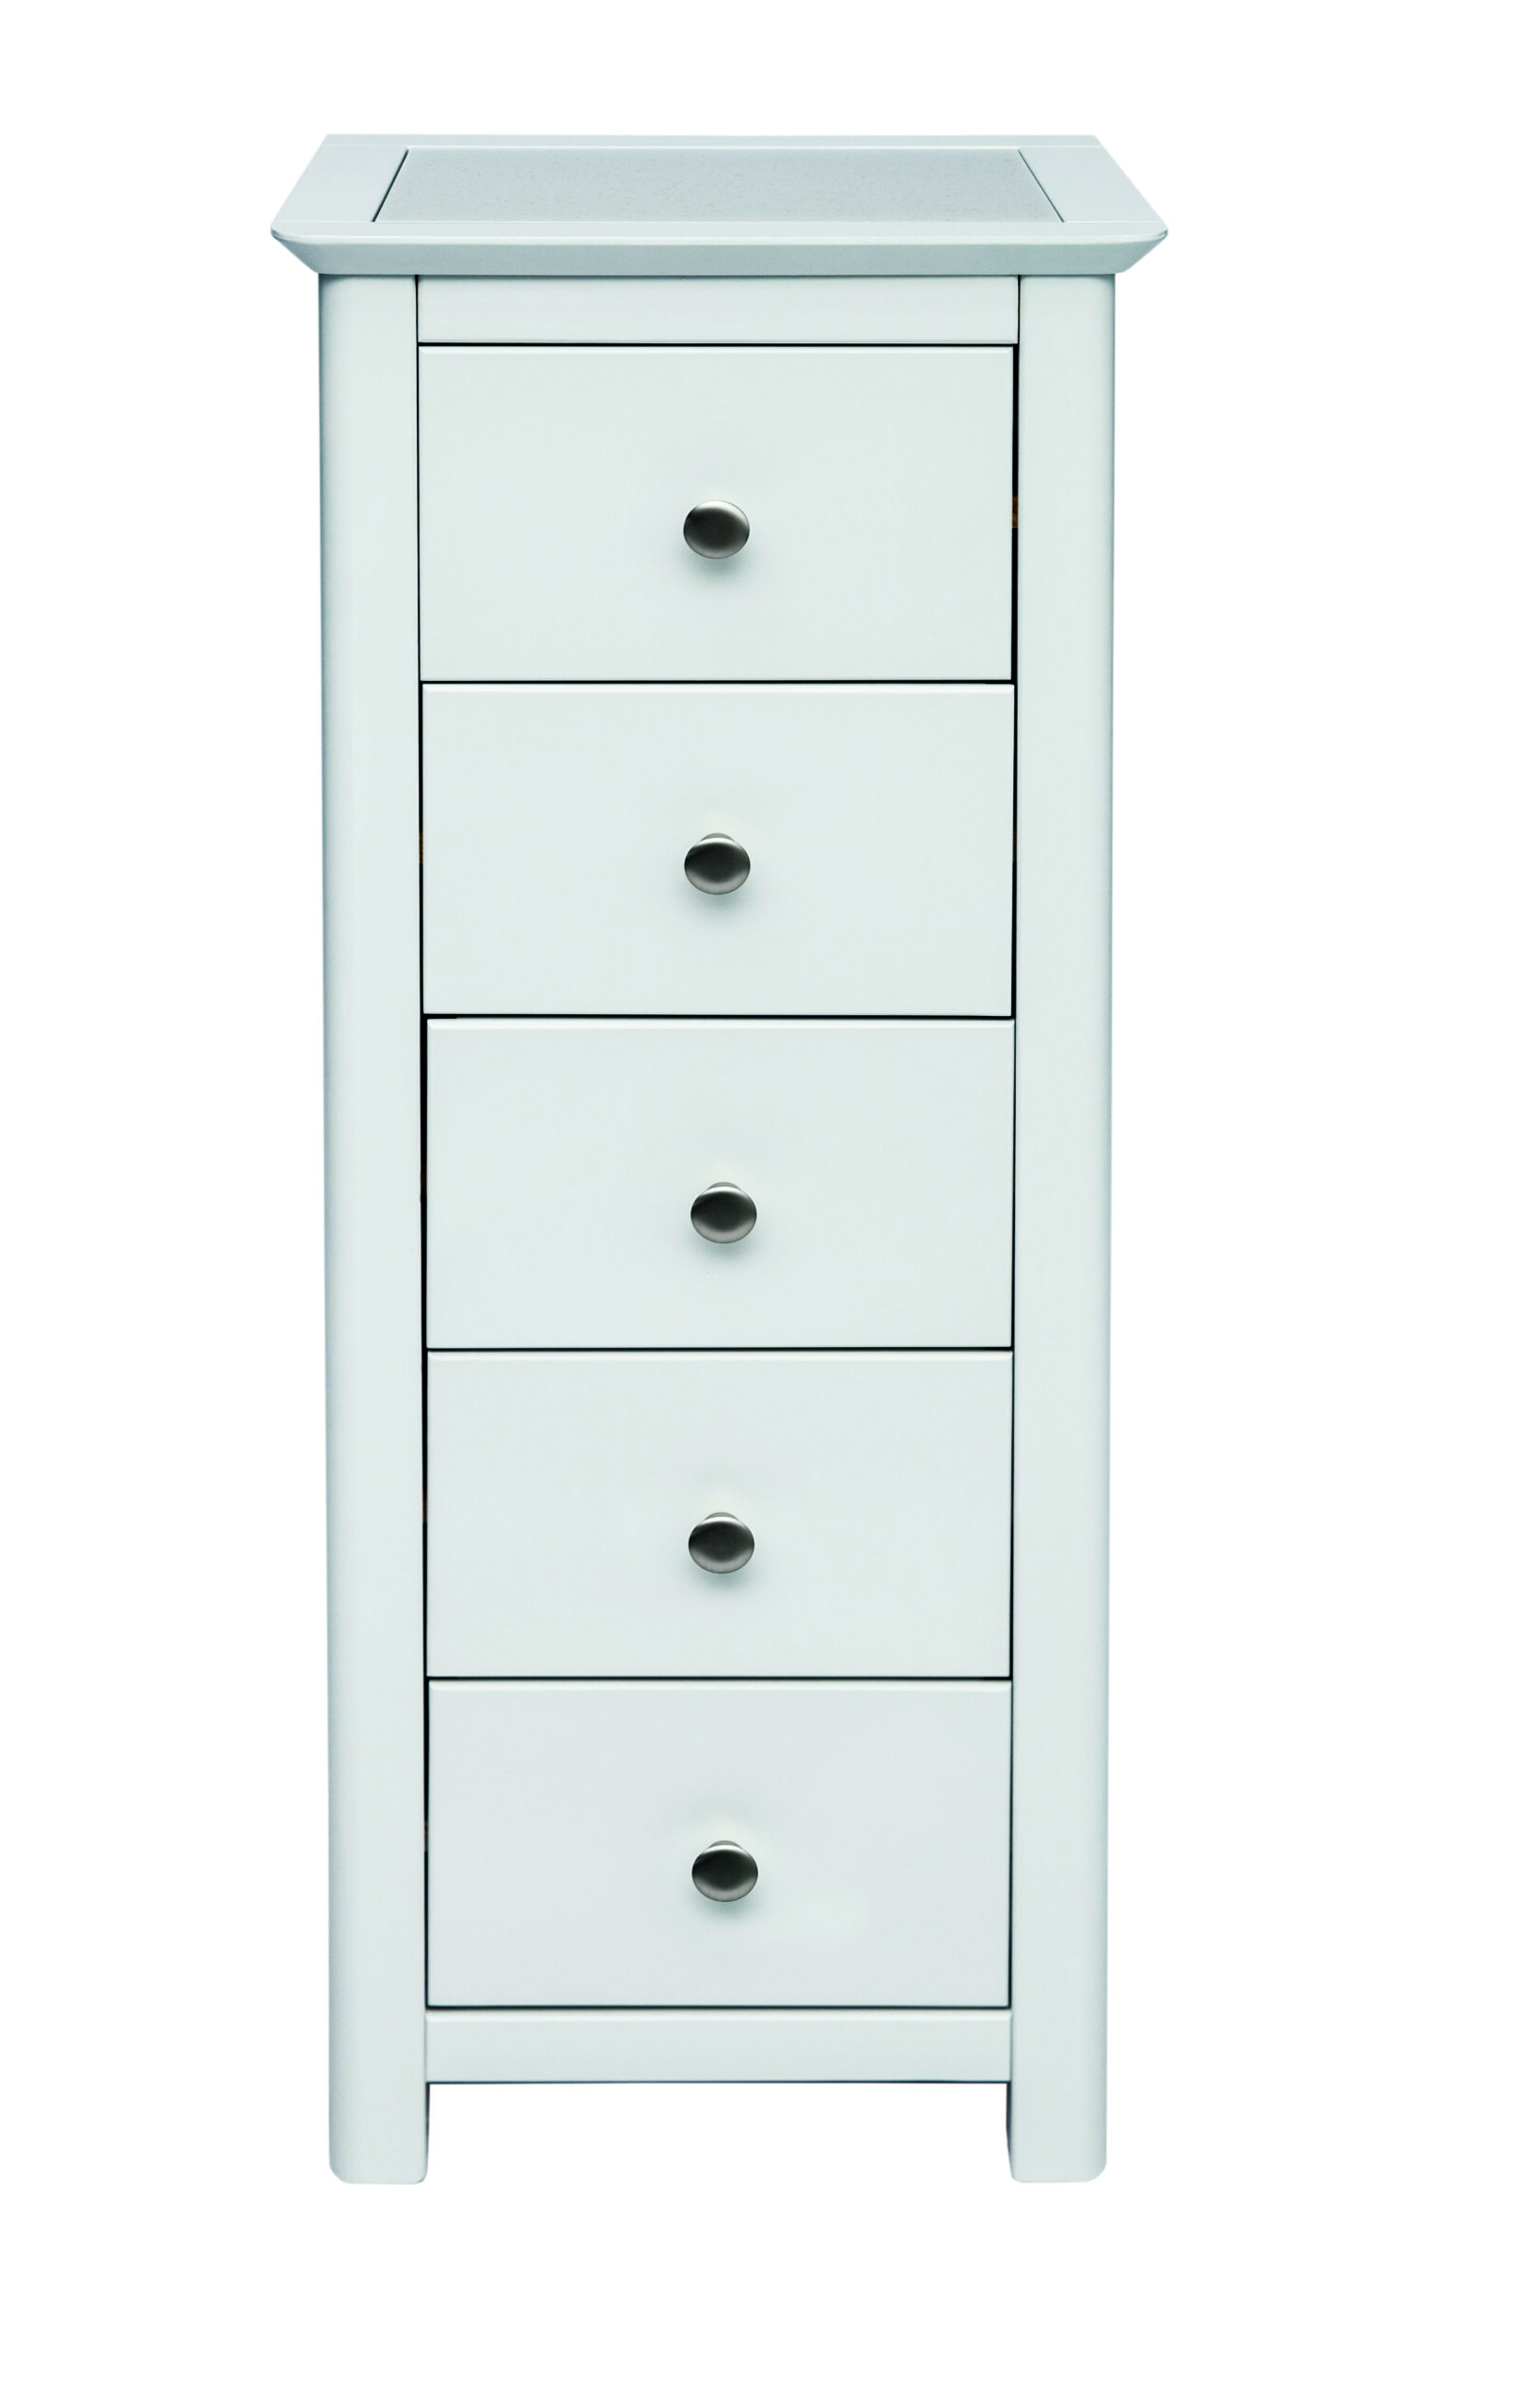 Ling 5 Drawer Narrow Chest